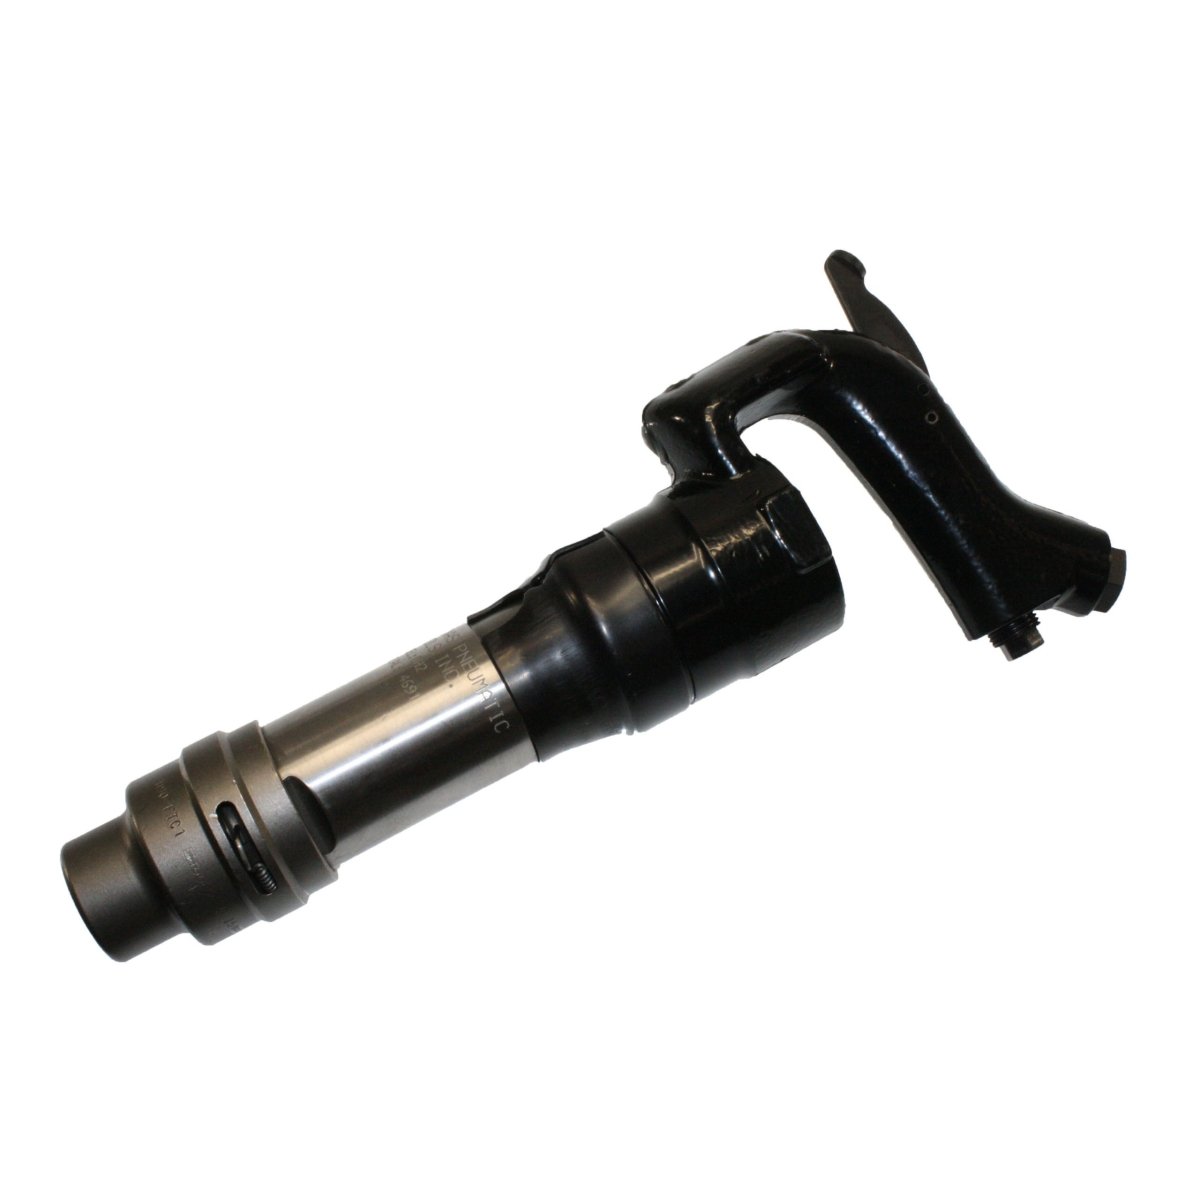 TX-CH3-R - 3" Stroke Chipping Hammer w/ Round Bushing & Forged Handle - Texas Pneumatic Tools